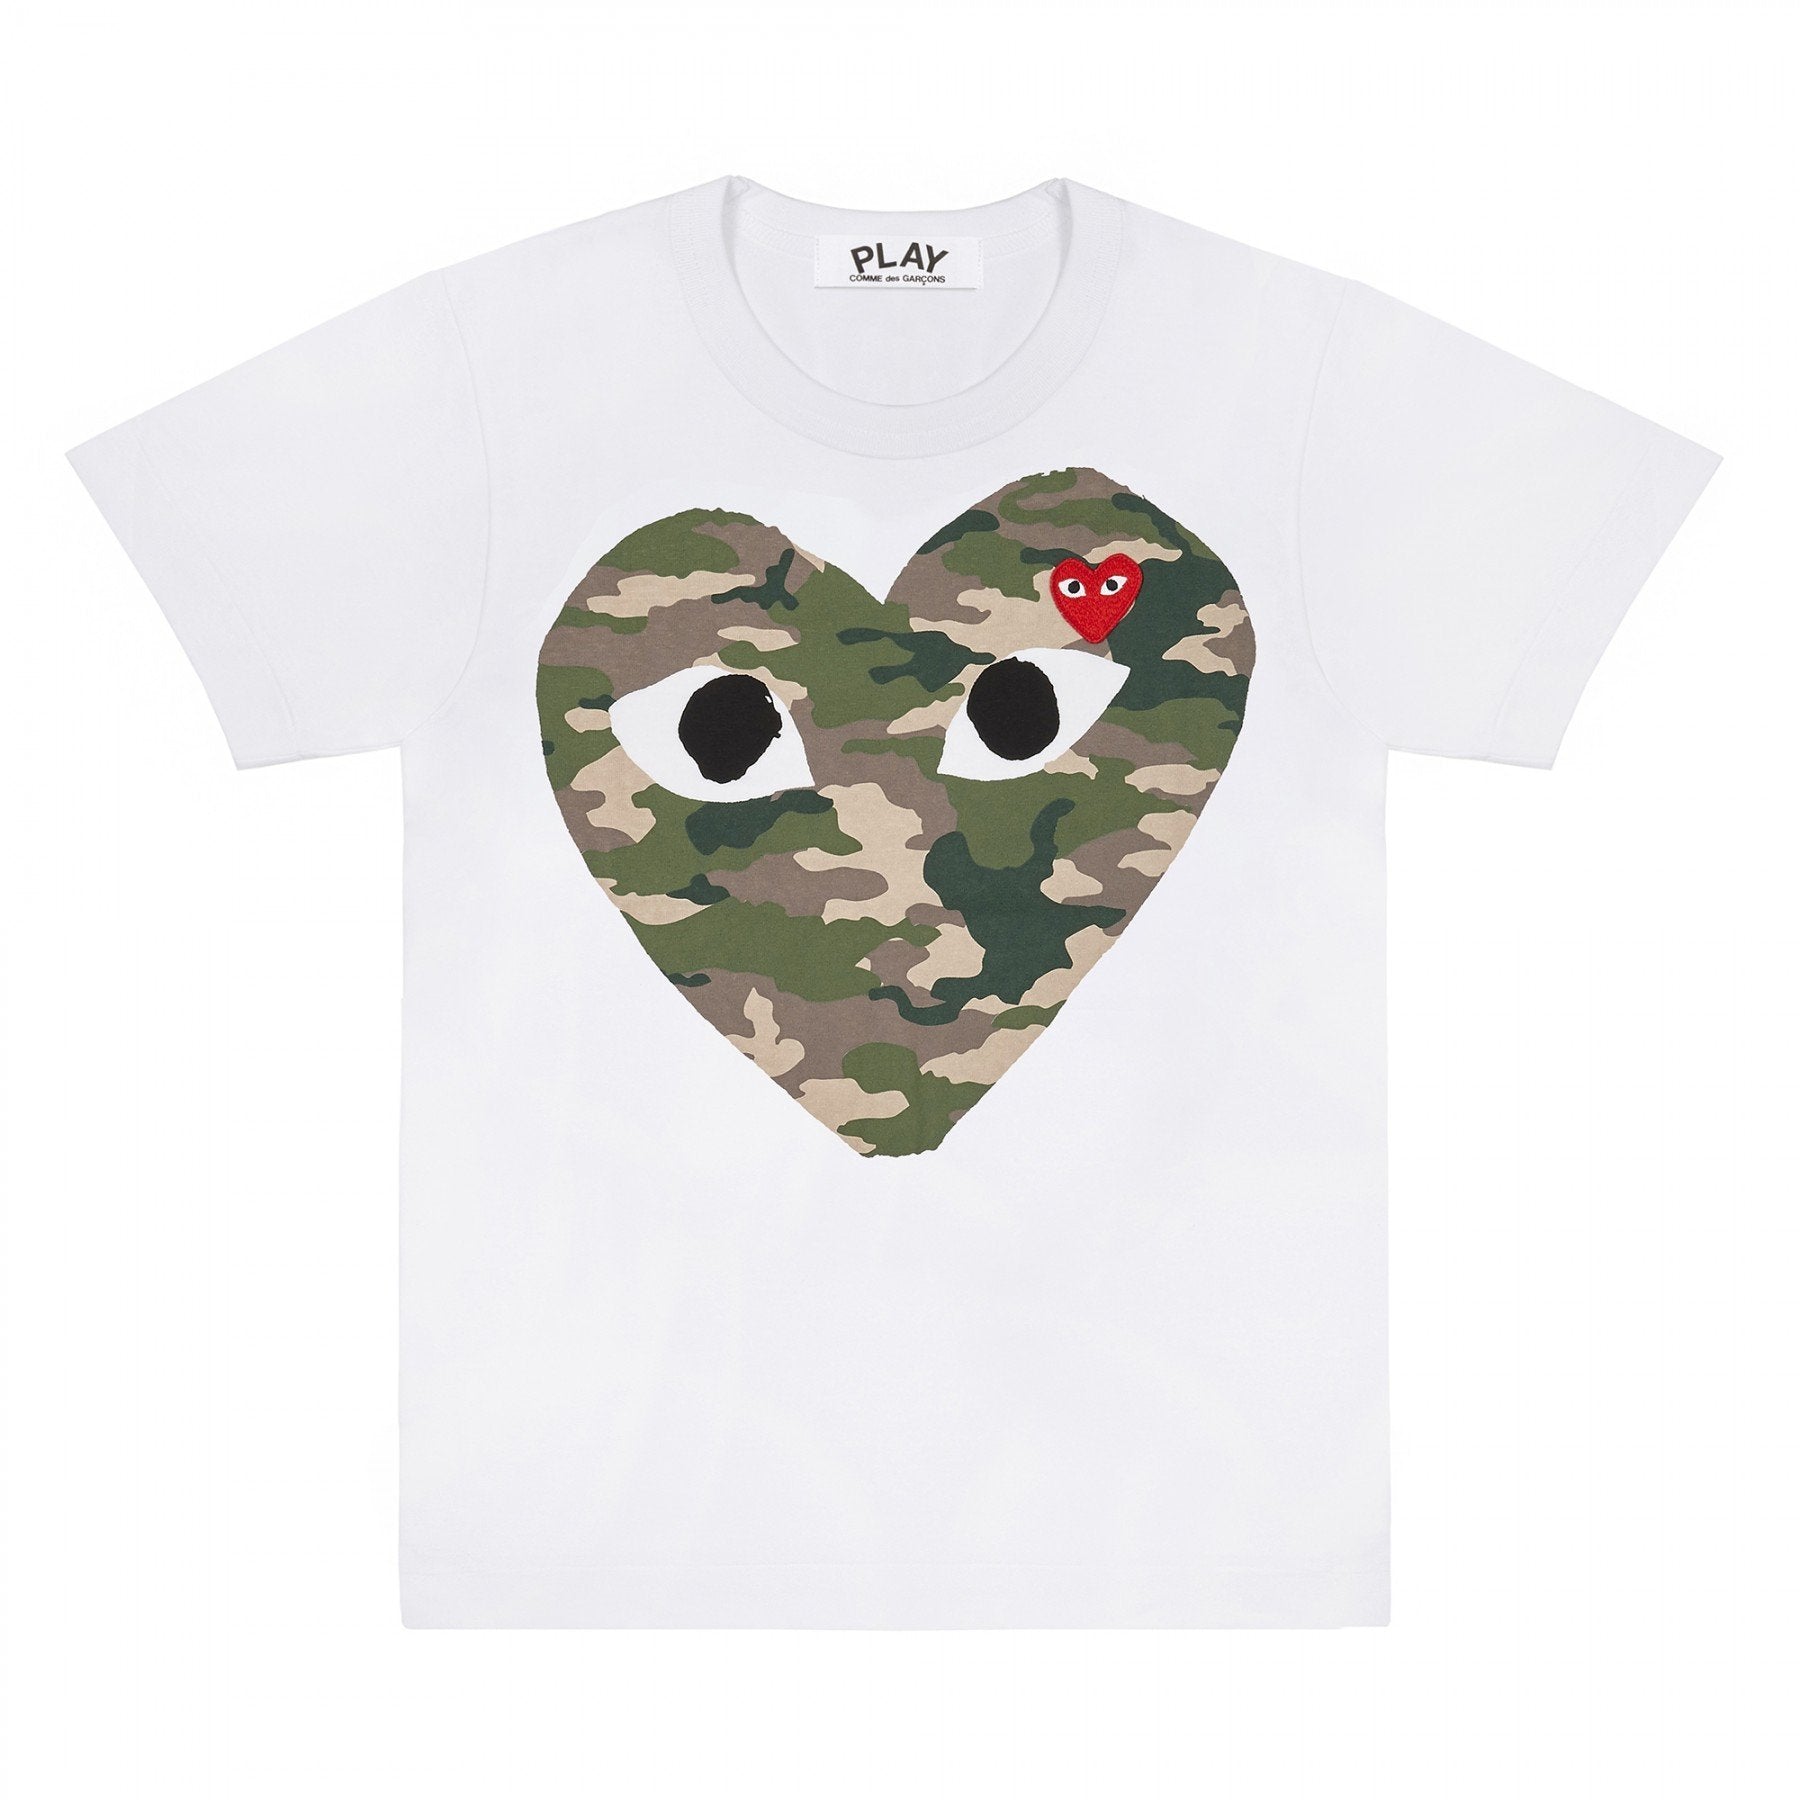 PLAY White T-Shirt with Camo Printed Heart